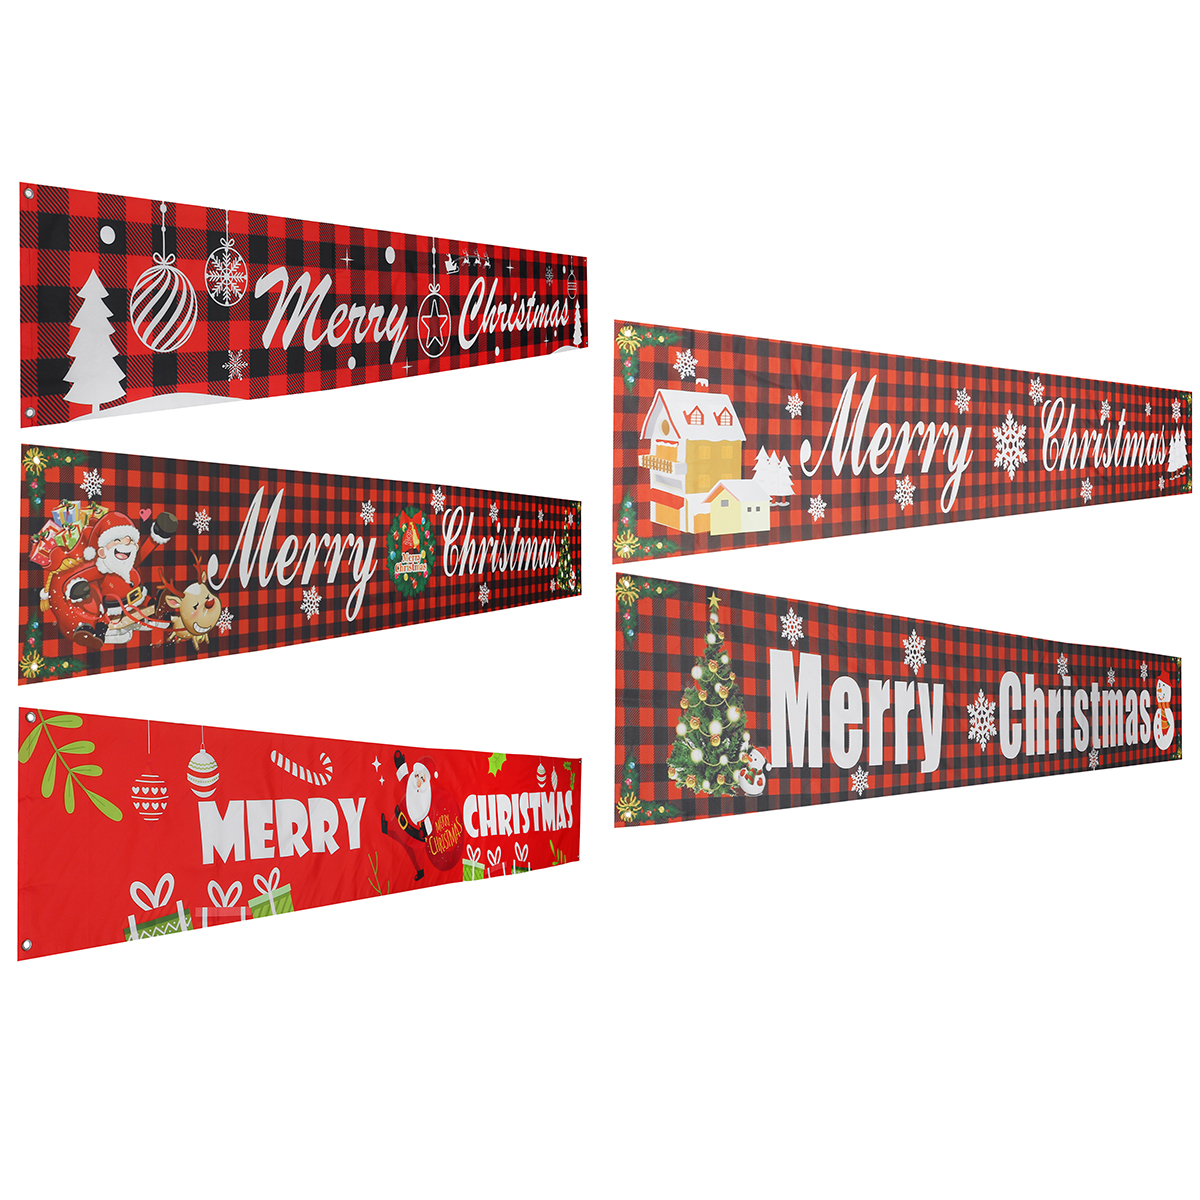 3M-Merry-Christmas-Outdoor-Banner-Oxford-Large-Hanging-Bunting-Xmas-Door-Wall-Decoration-Photography-1764541-8